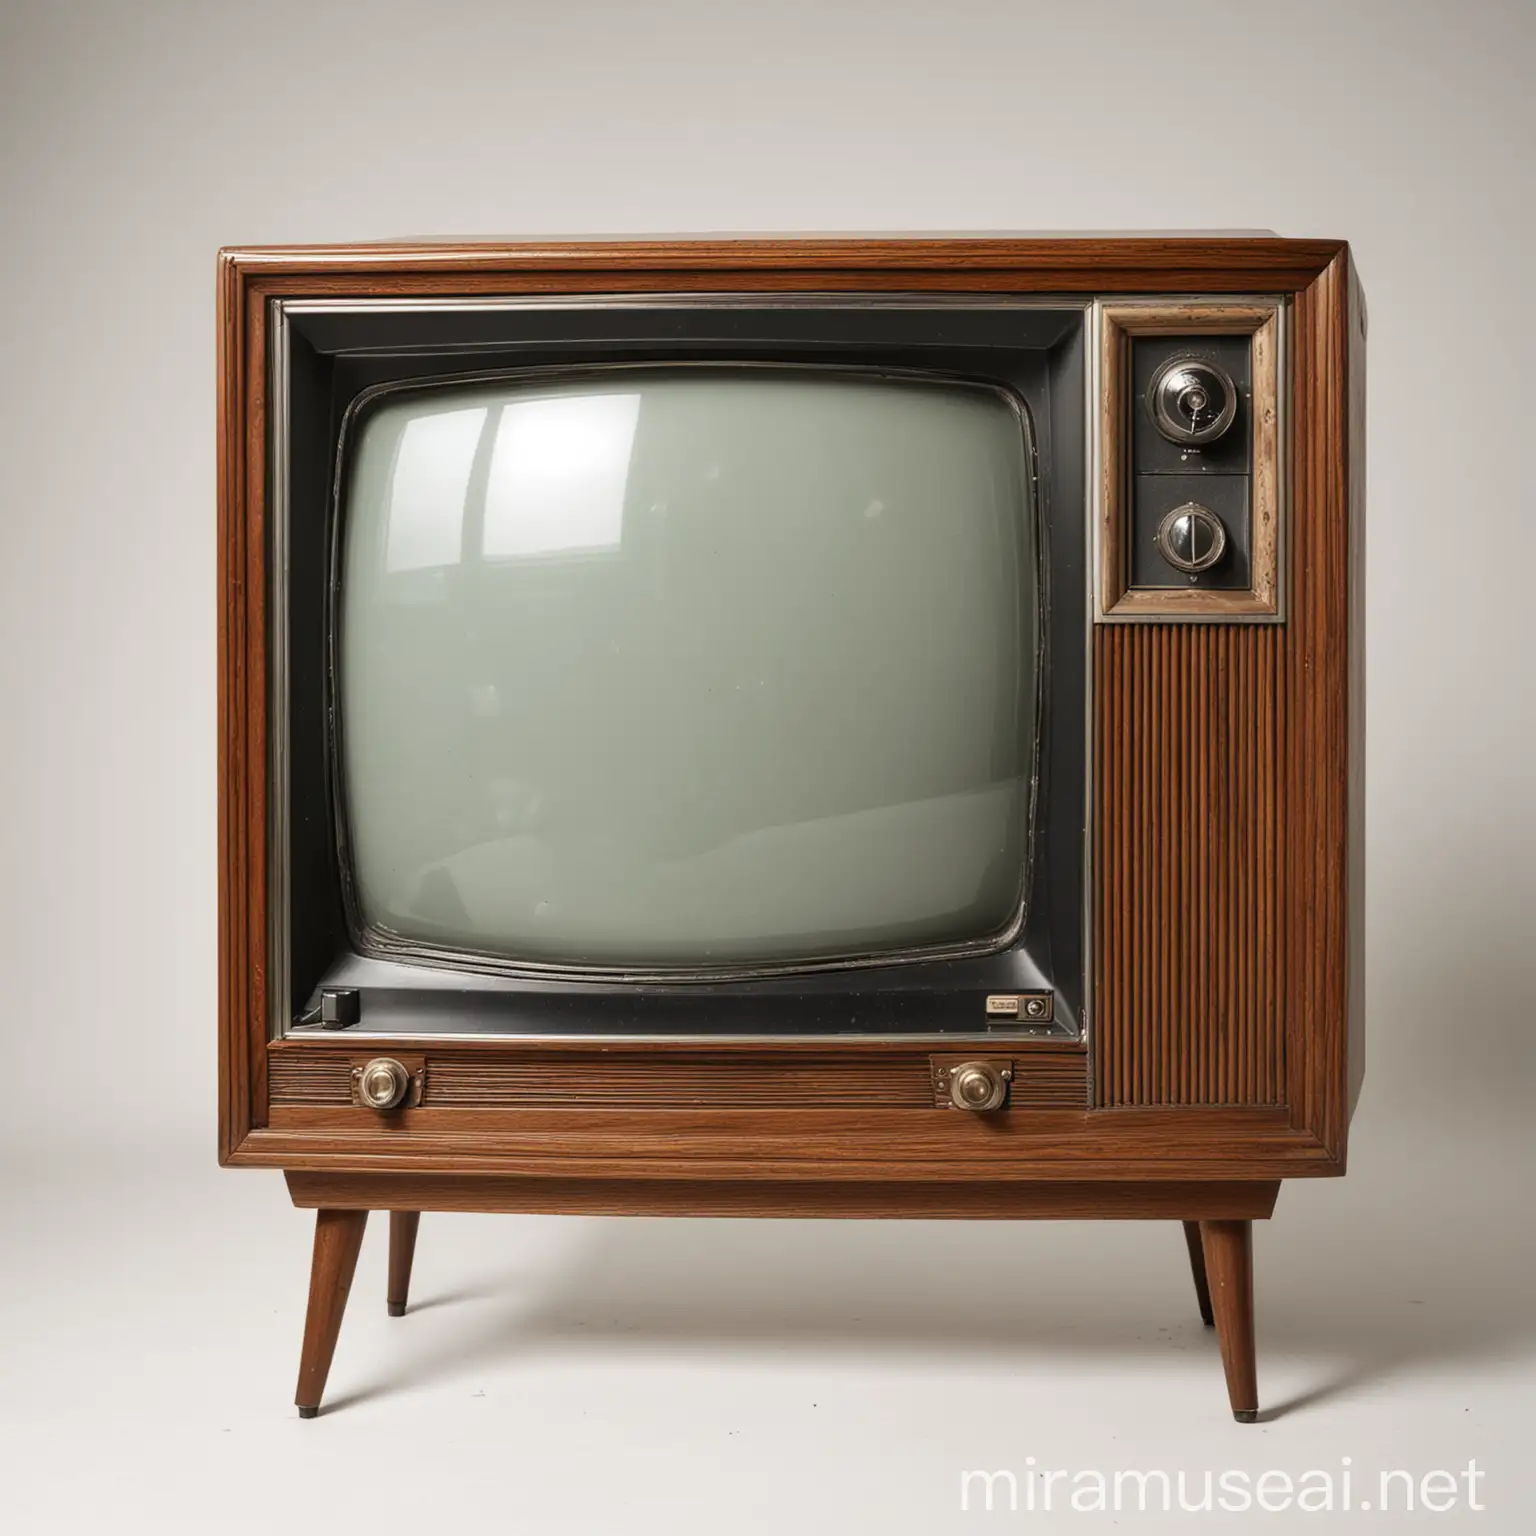 An old time console television, circa 1950, against a solid white background, no shadows. Photographic quality.

